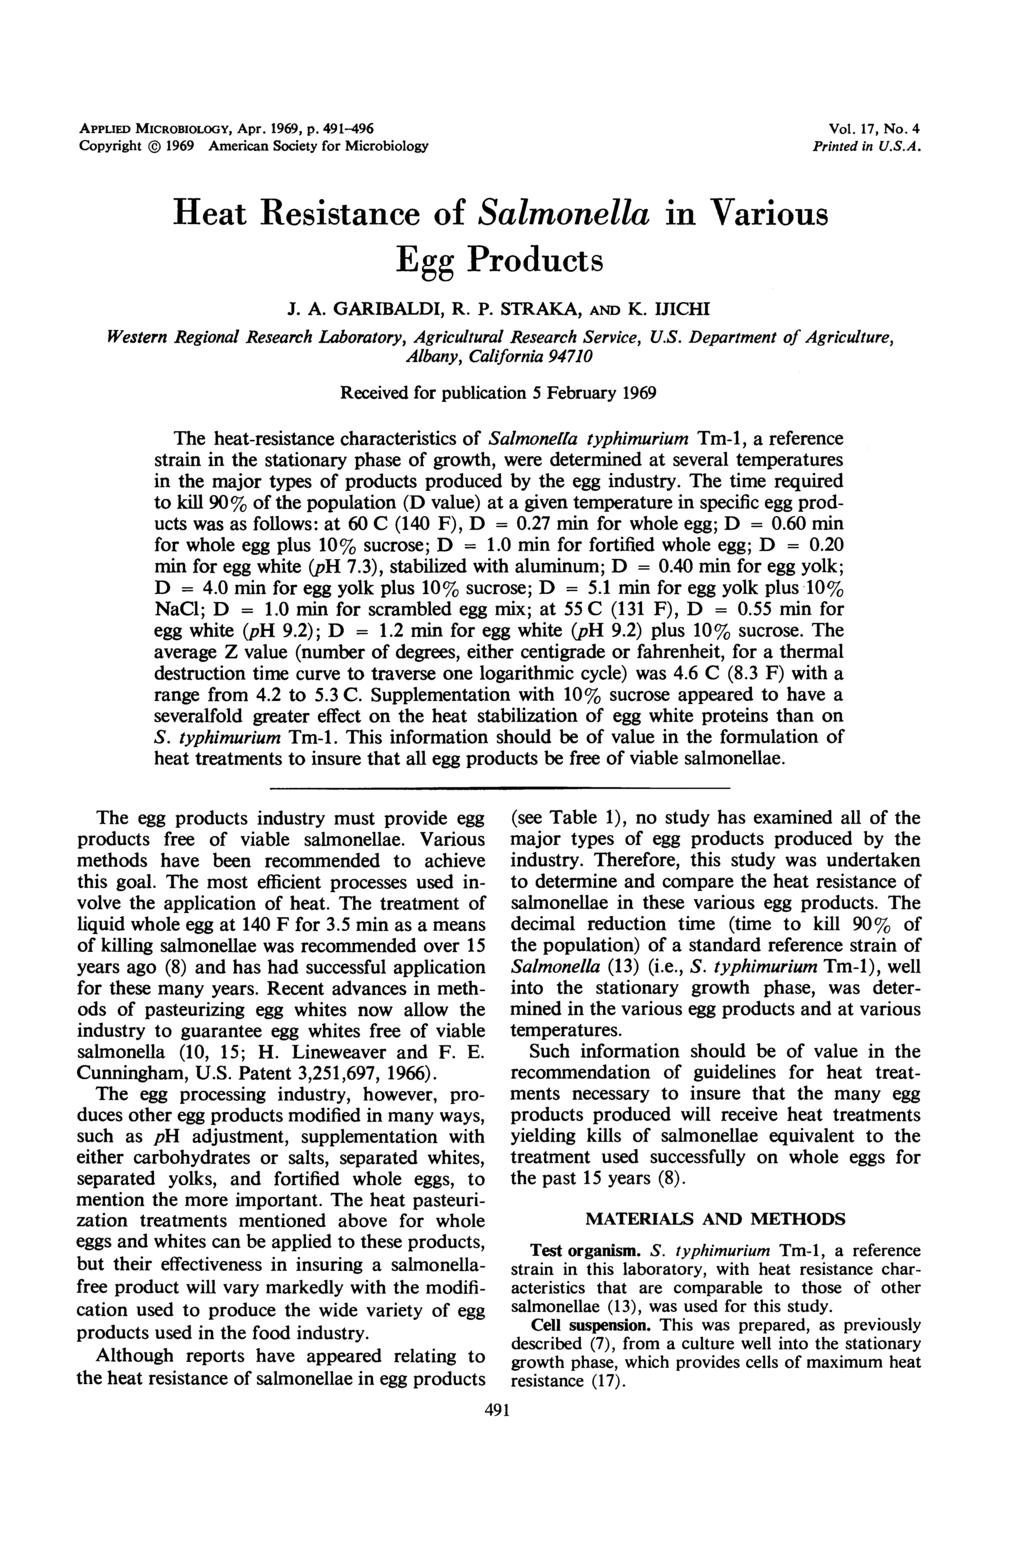 APPLIED MICROBIOLOGY, Apr. 1969, p. 491-496 Vol. 17, No. 4 Copyright @ 1969 American Society for Microbiology Printed in U.S.A. Heat Resistance of Salmonella in Various Egg Products J. A. GARIBALDI, R.